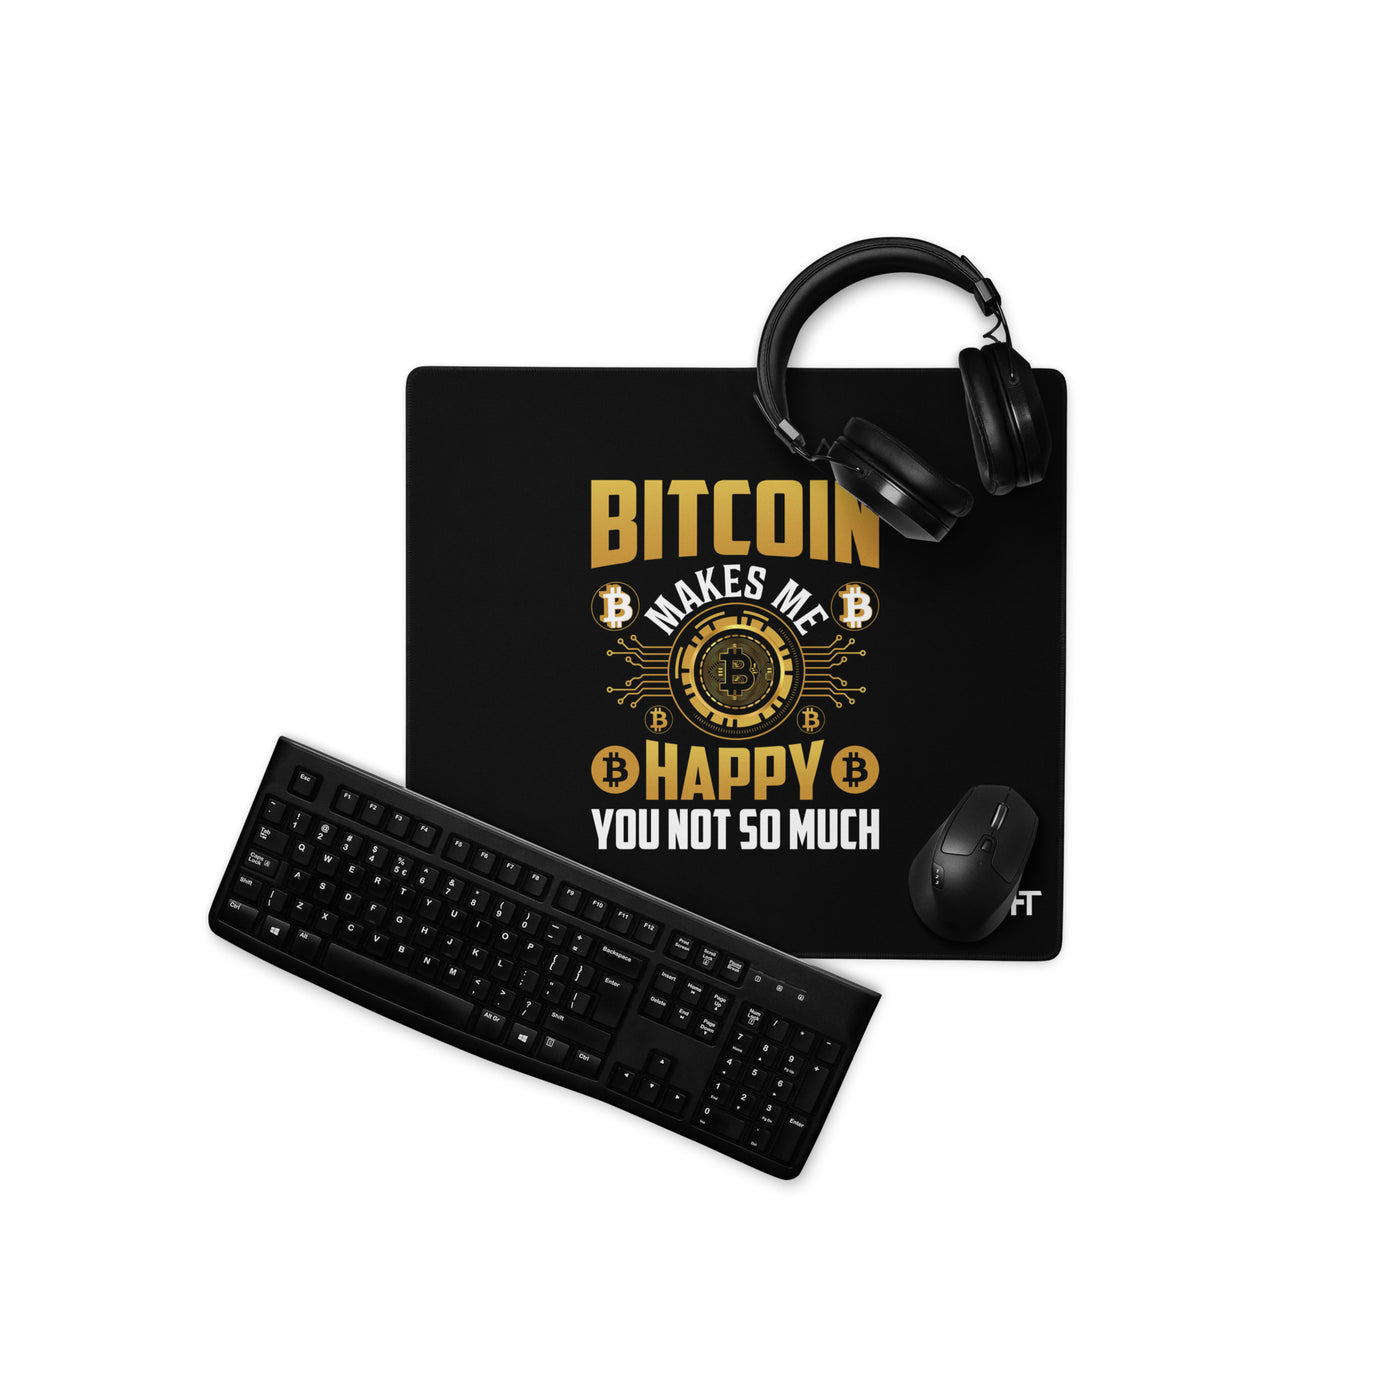 Bitcoin Makes me Happy, you Not so much - Desk Mat